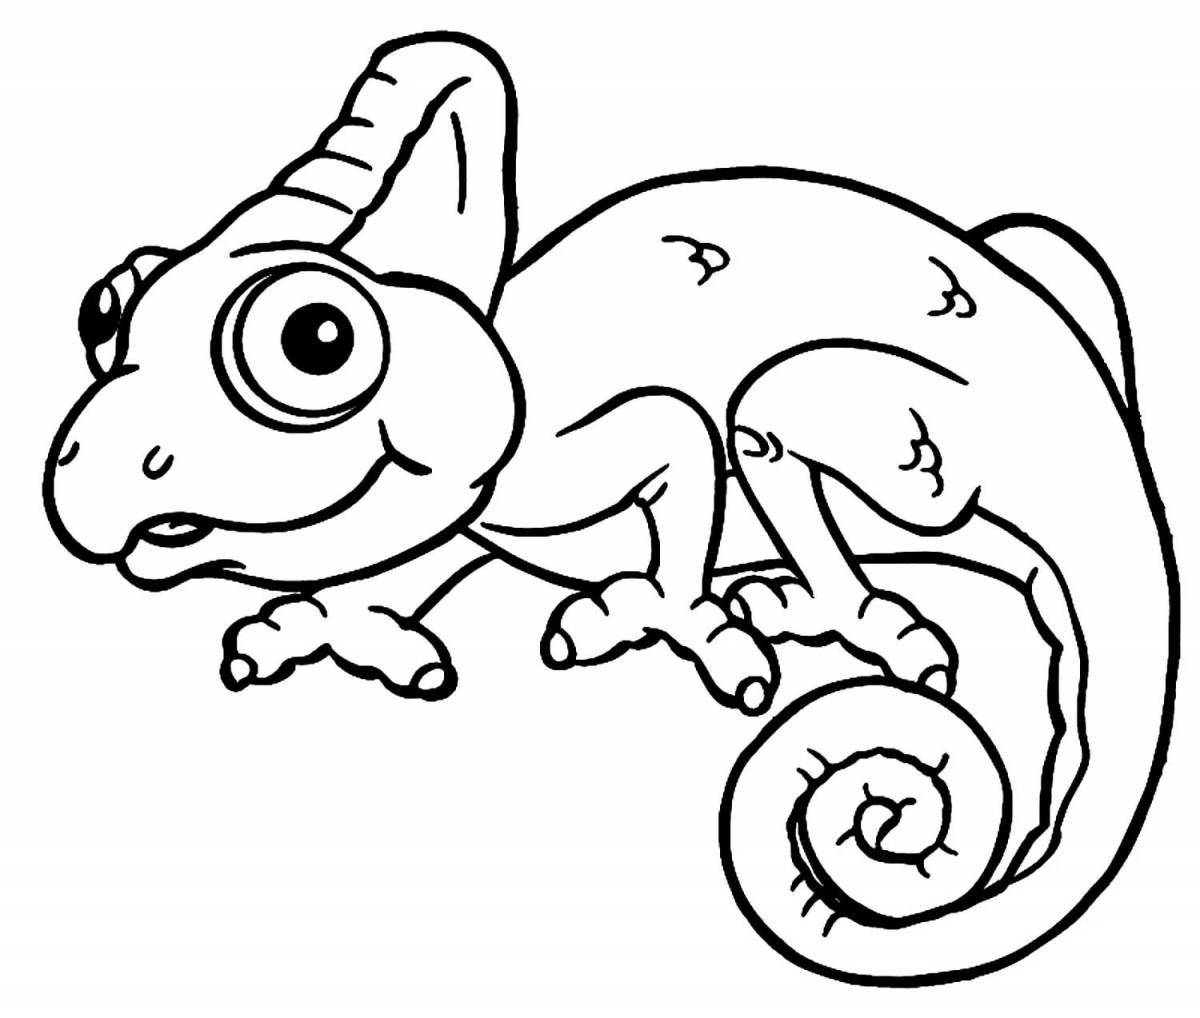 Intriguing chameleon coloring book